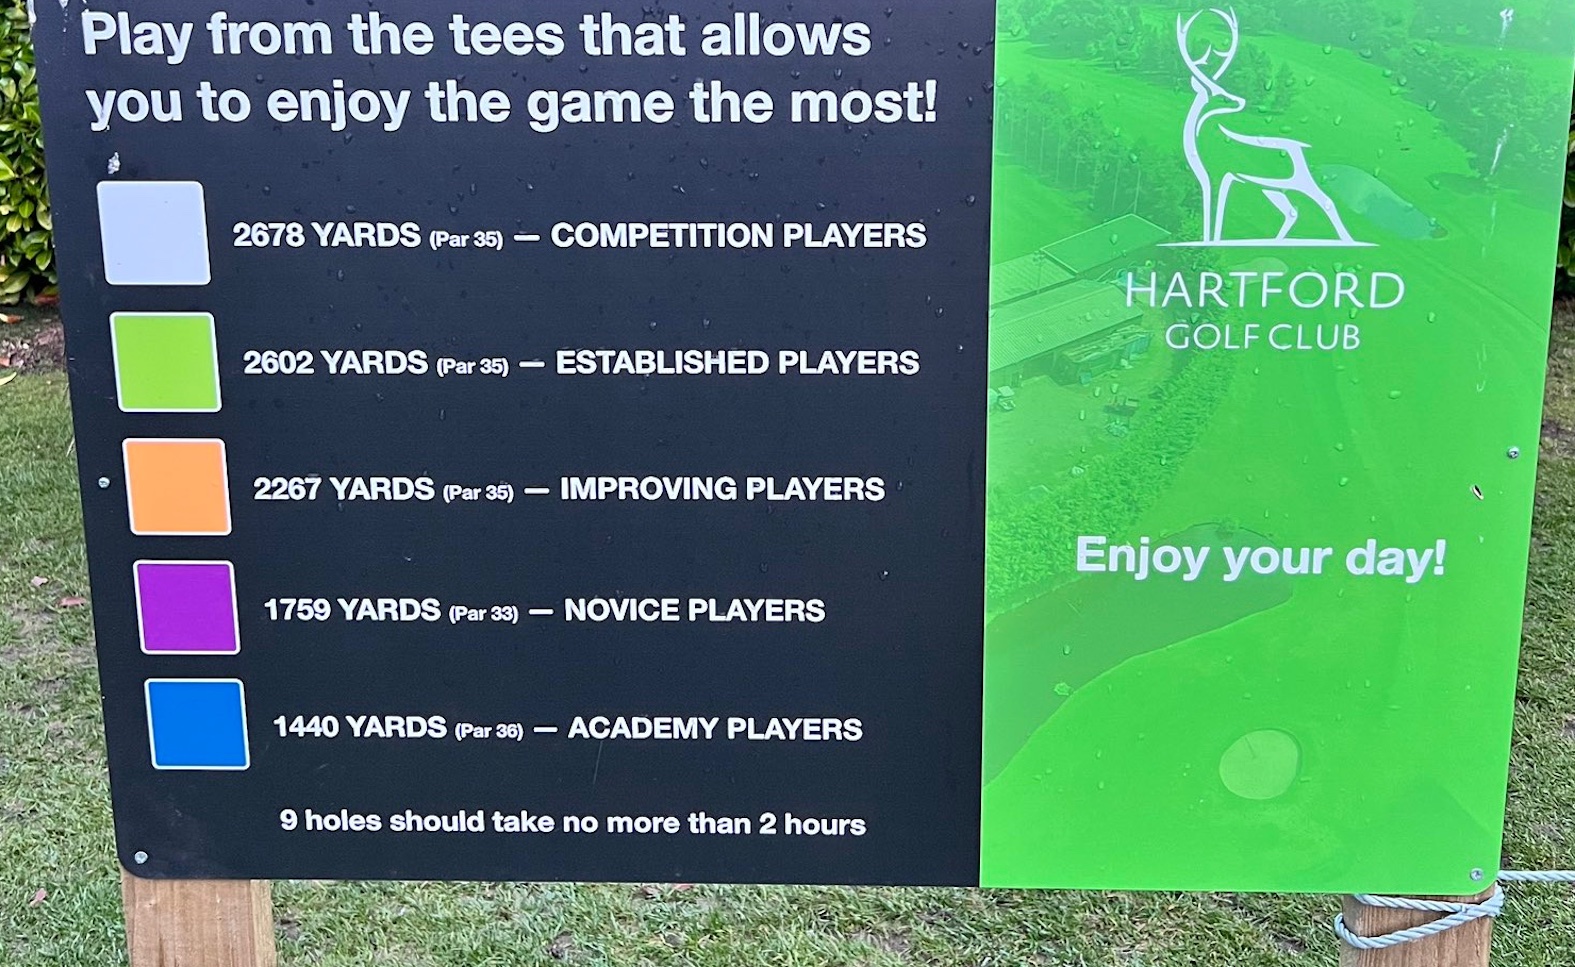 Cheshire club Hartford GC does not organise its tees based on gender